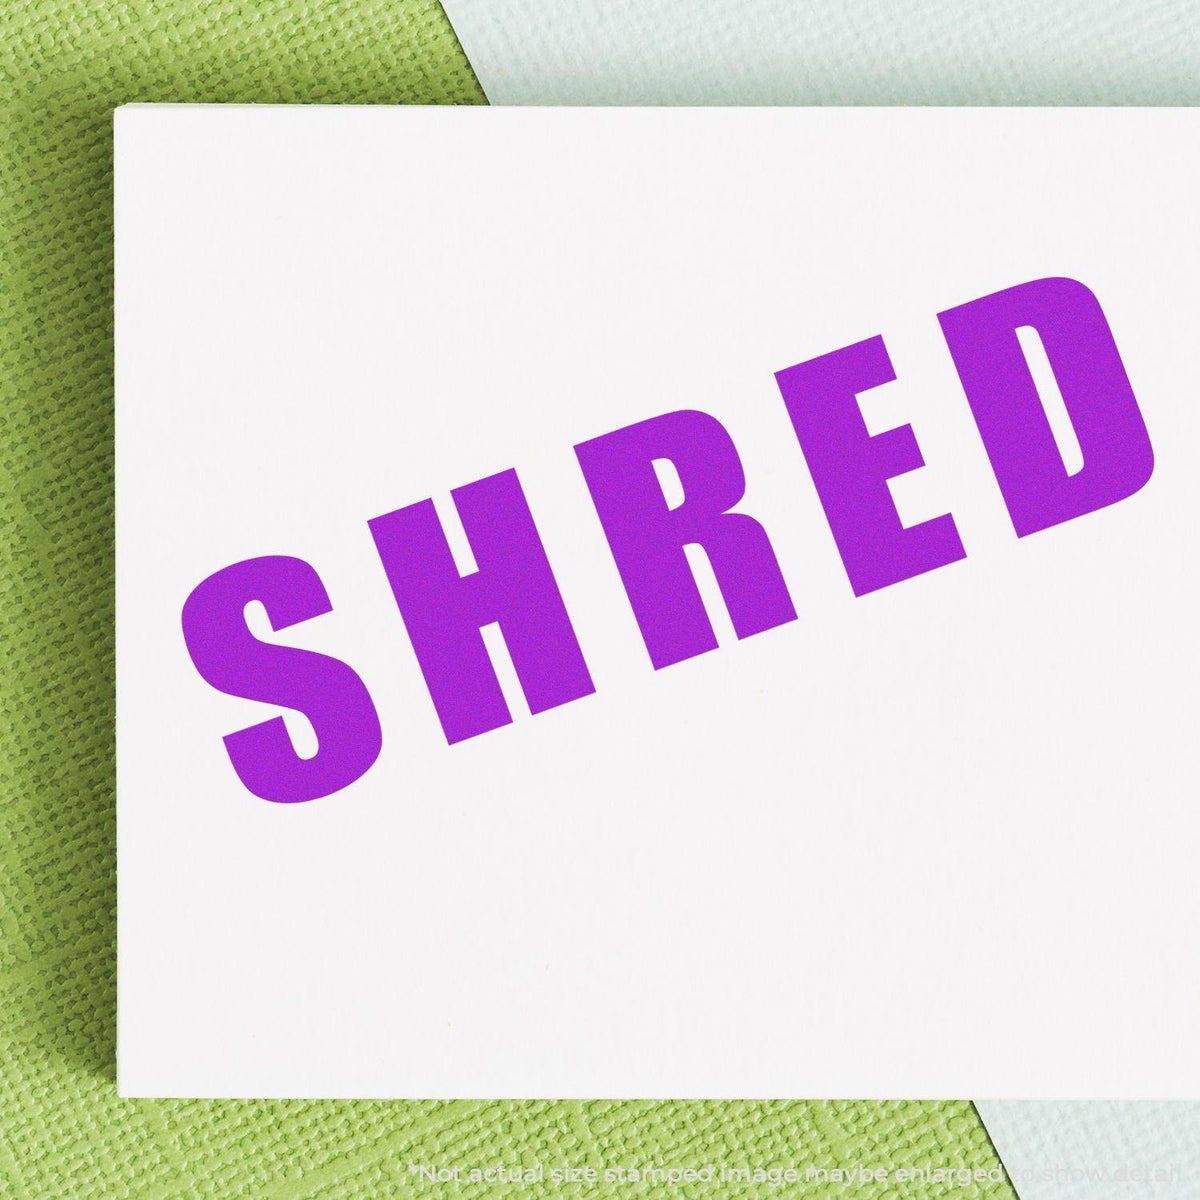 In Use Bold Shred Rubber Stamp Image